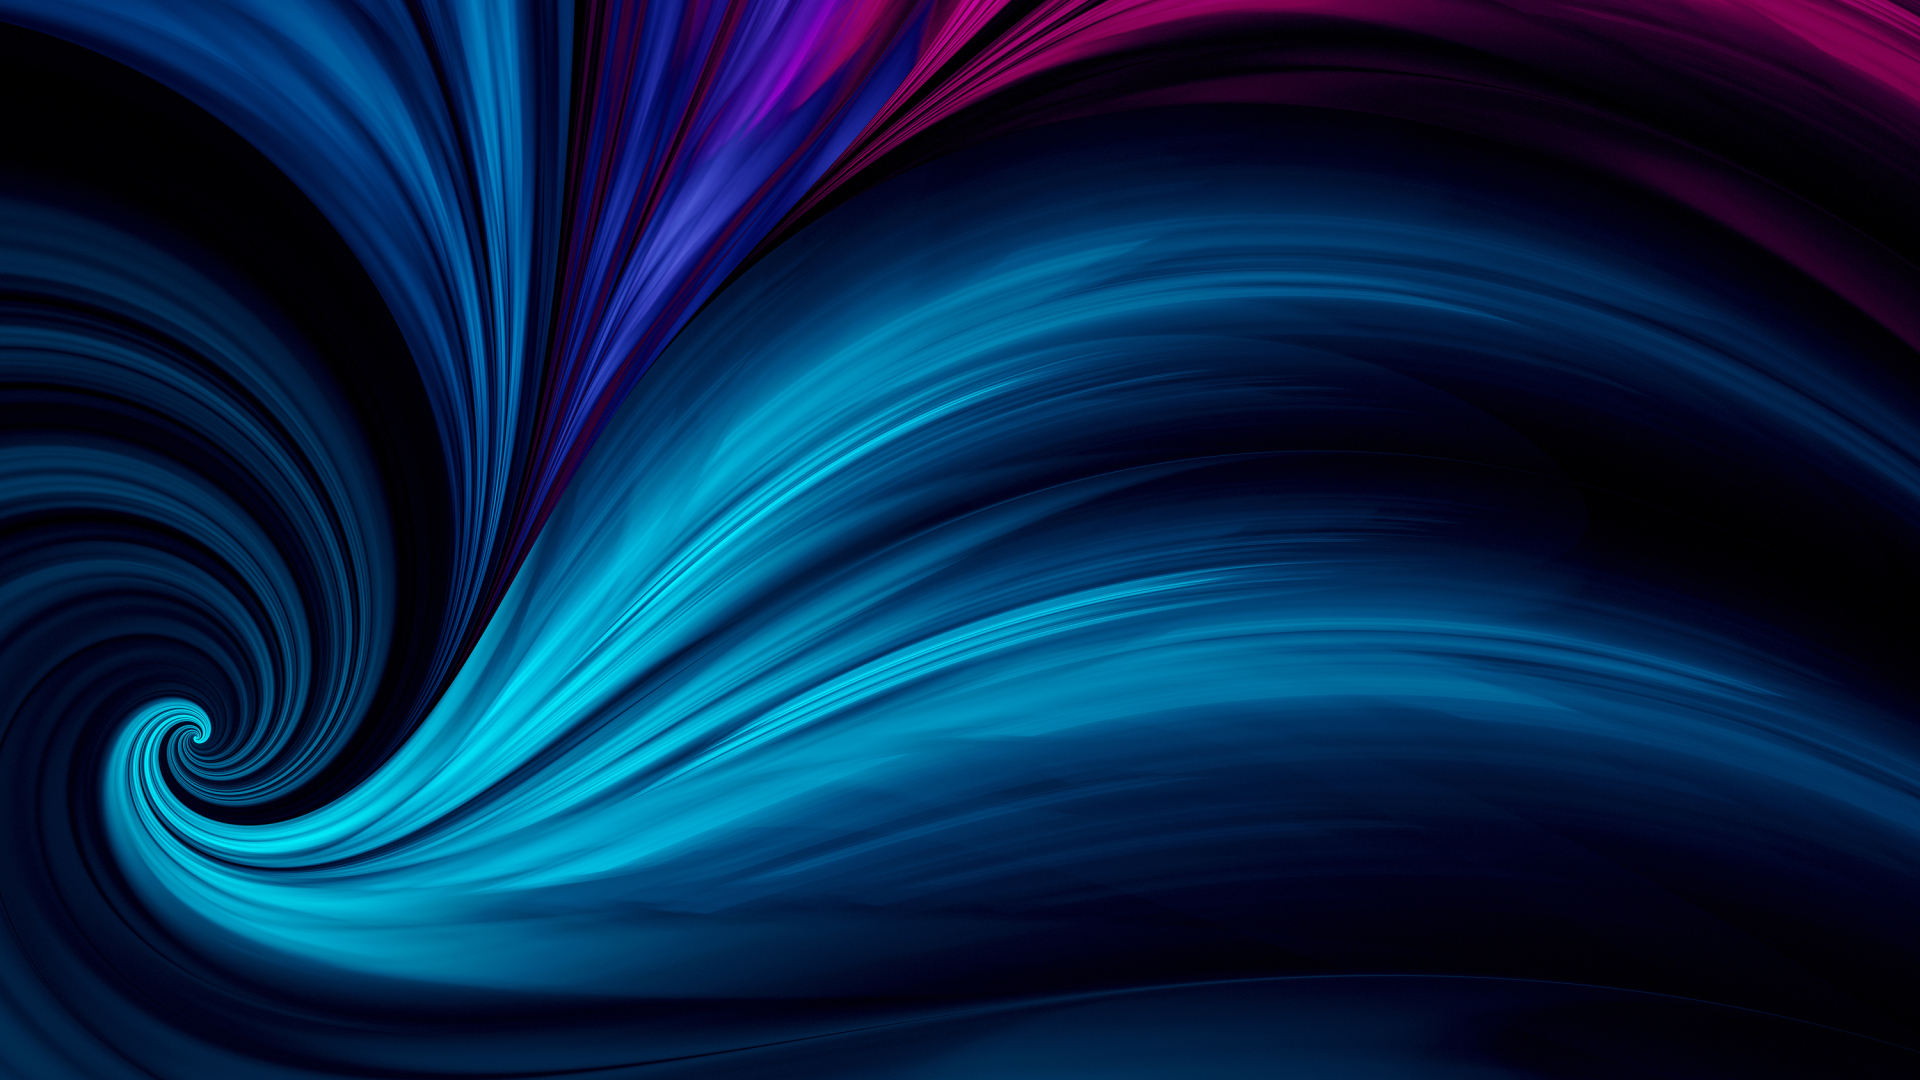 Hd Wallpapers Abstract Blue